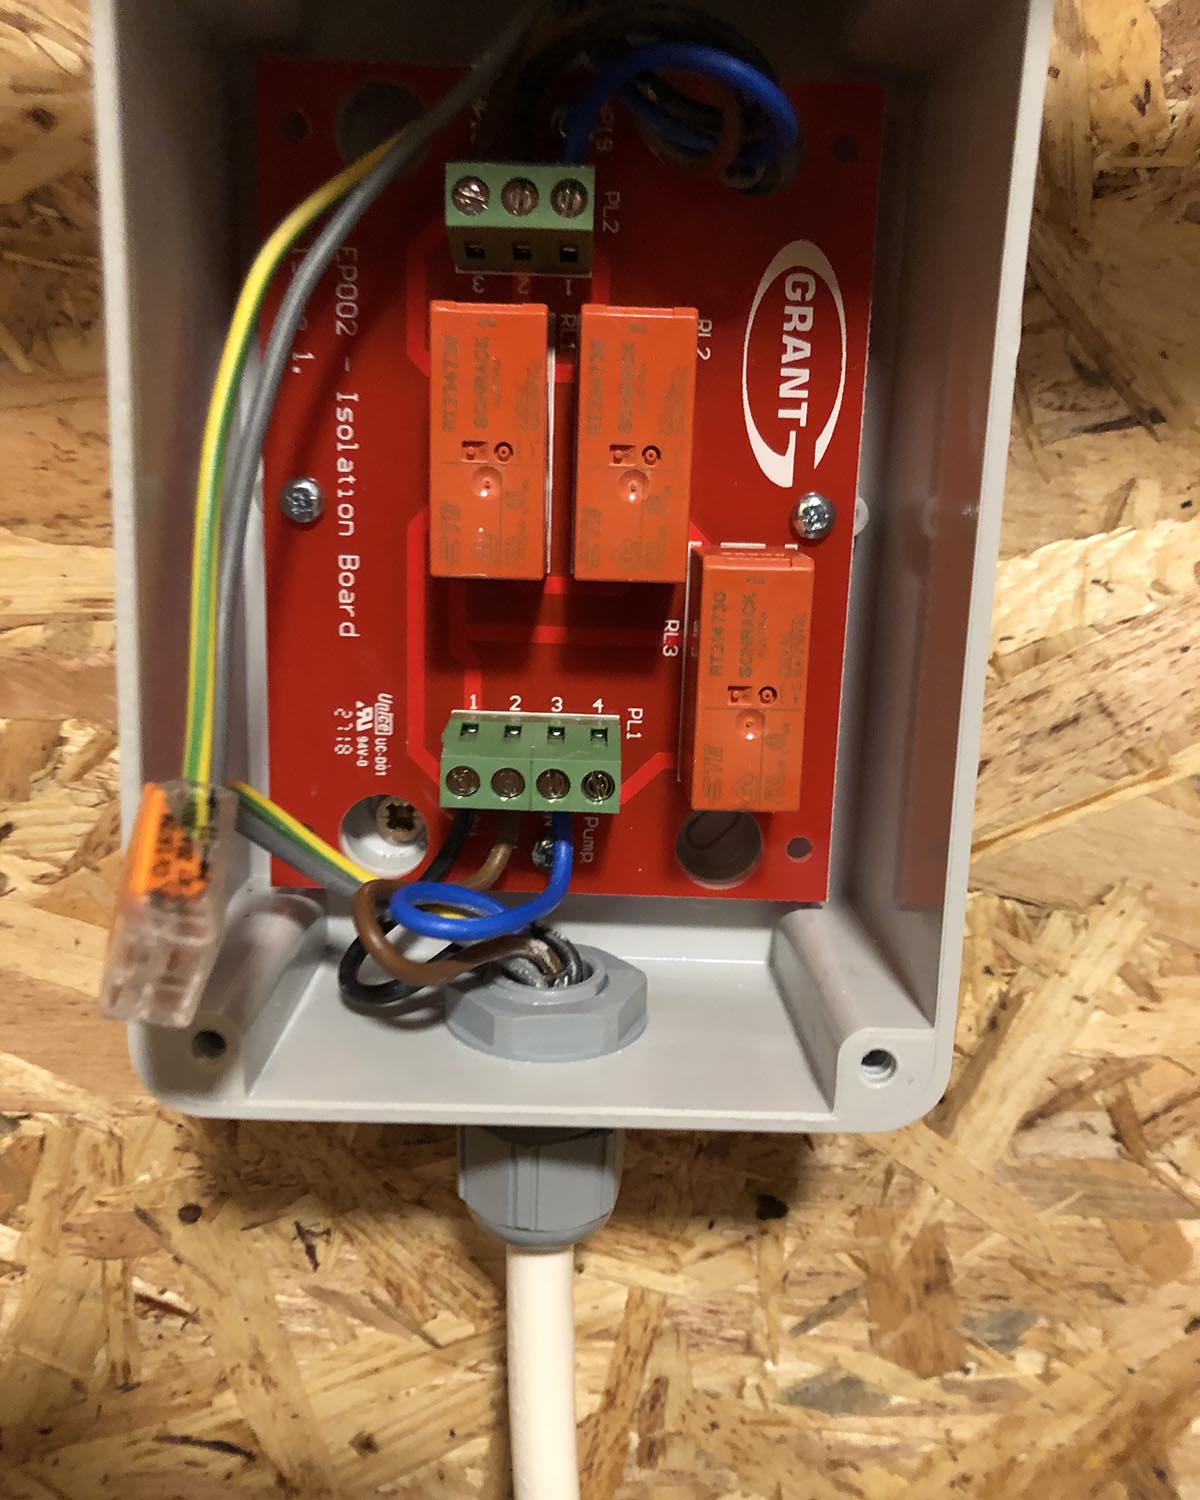 control board with wires. NBG Digital Home. Electric Vehicle chargers, Solar and Heat Pumps, General Electrical Services in the South West.